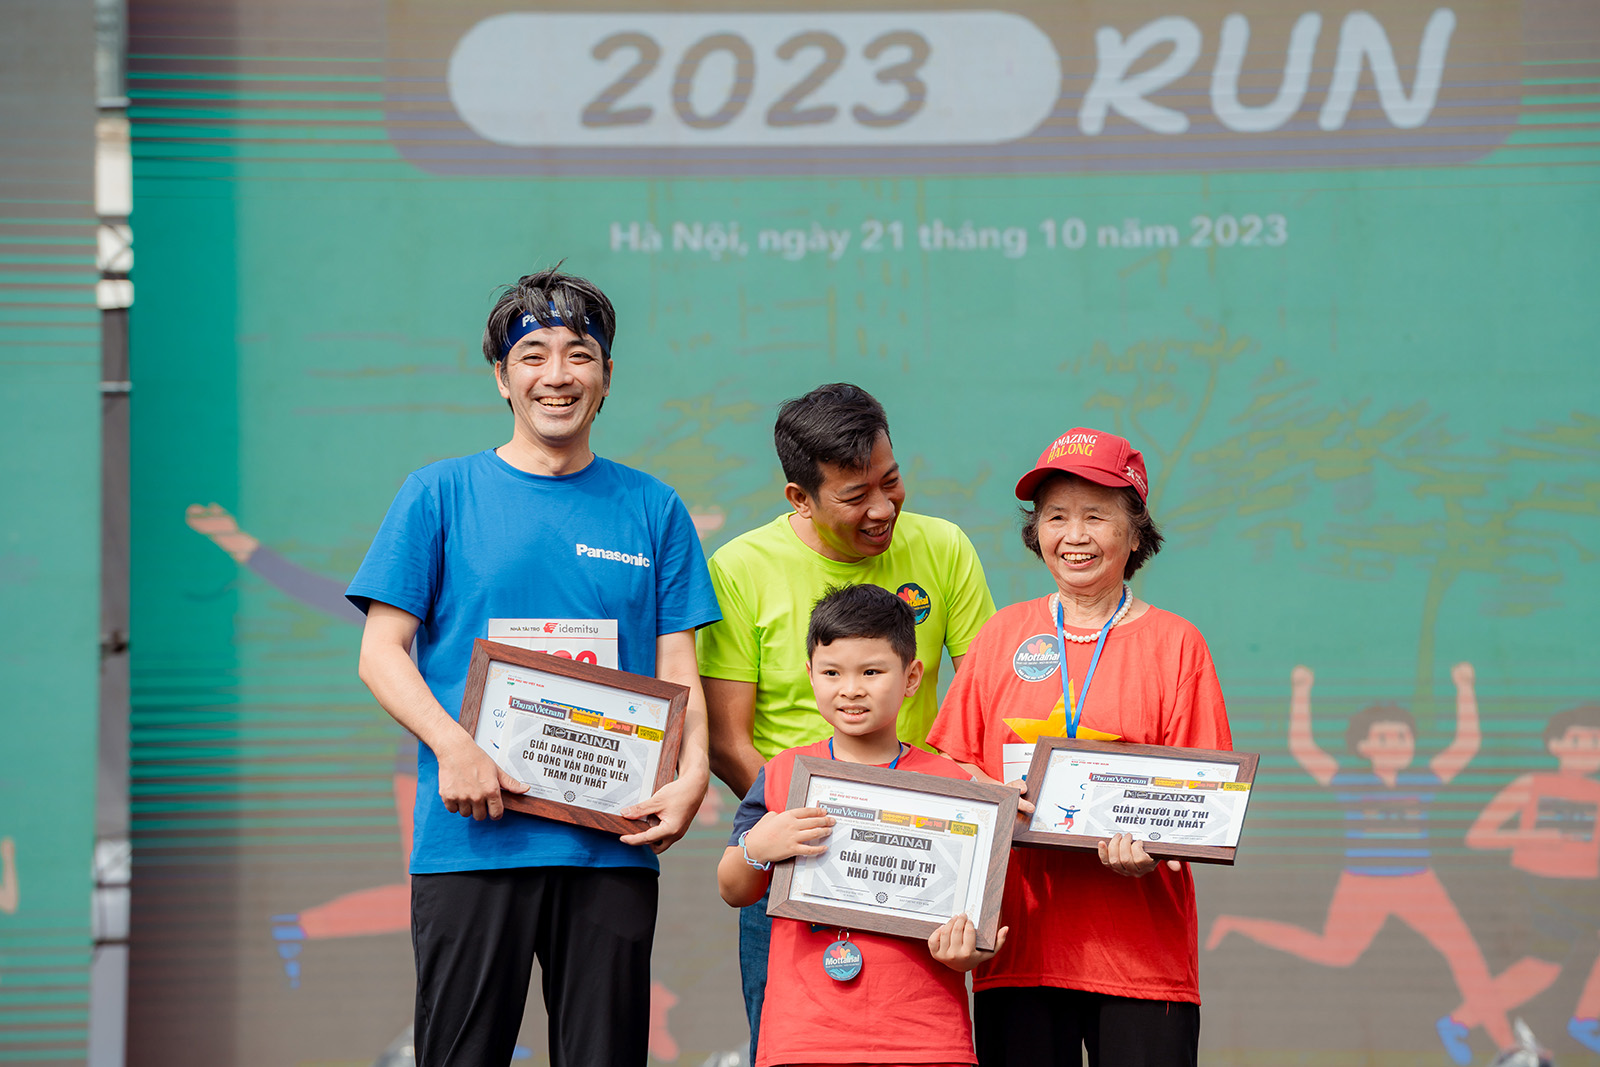 Photo: Panasonic was honored as the enterprise with the most participants at this year’s run